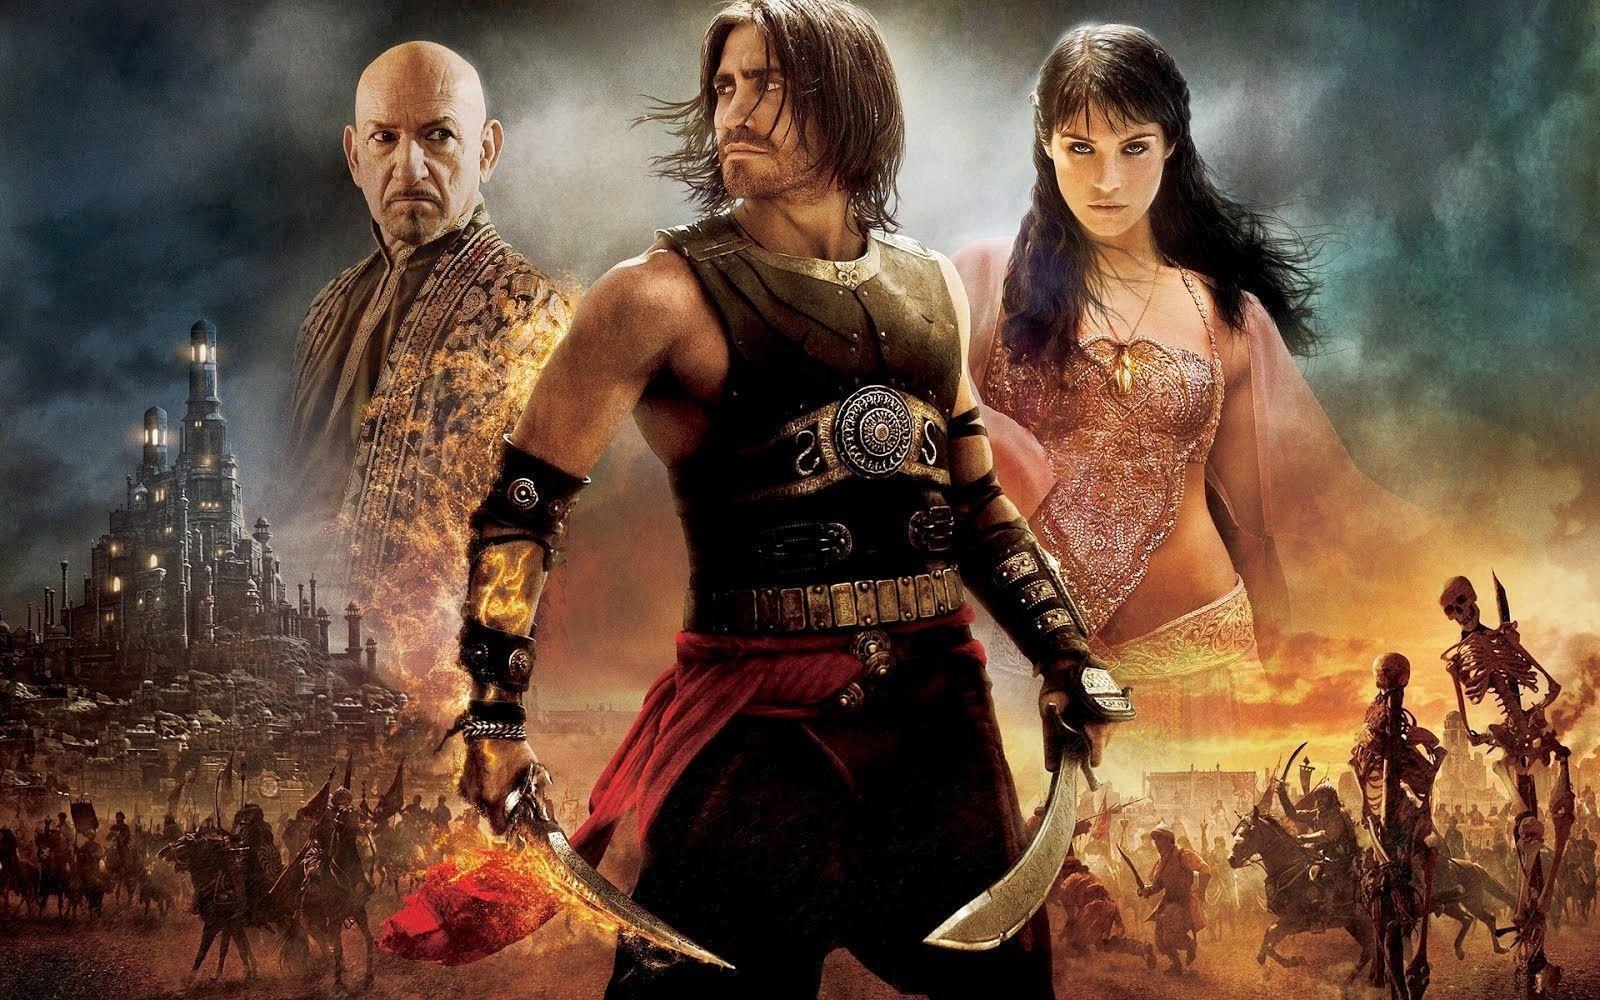 prince of persia game sands of time